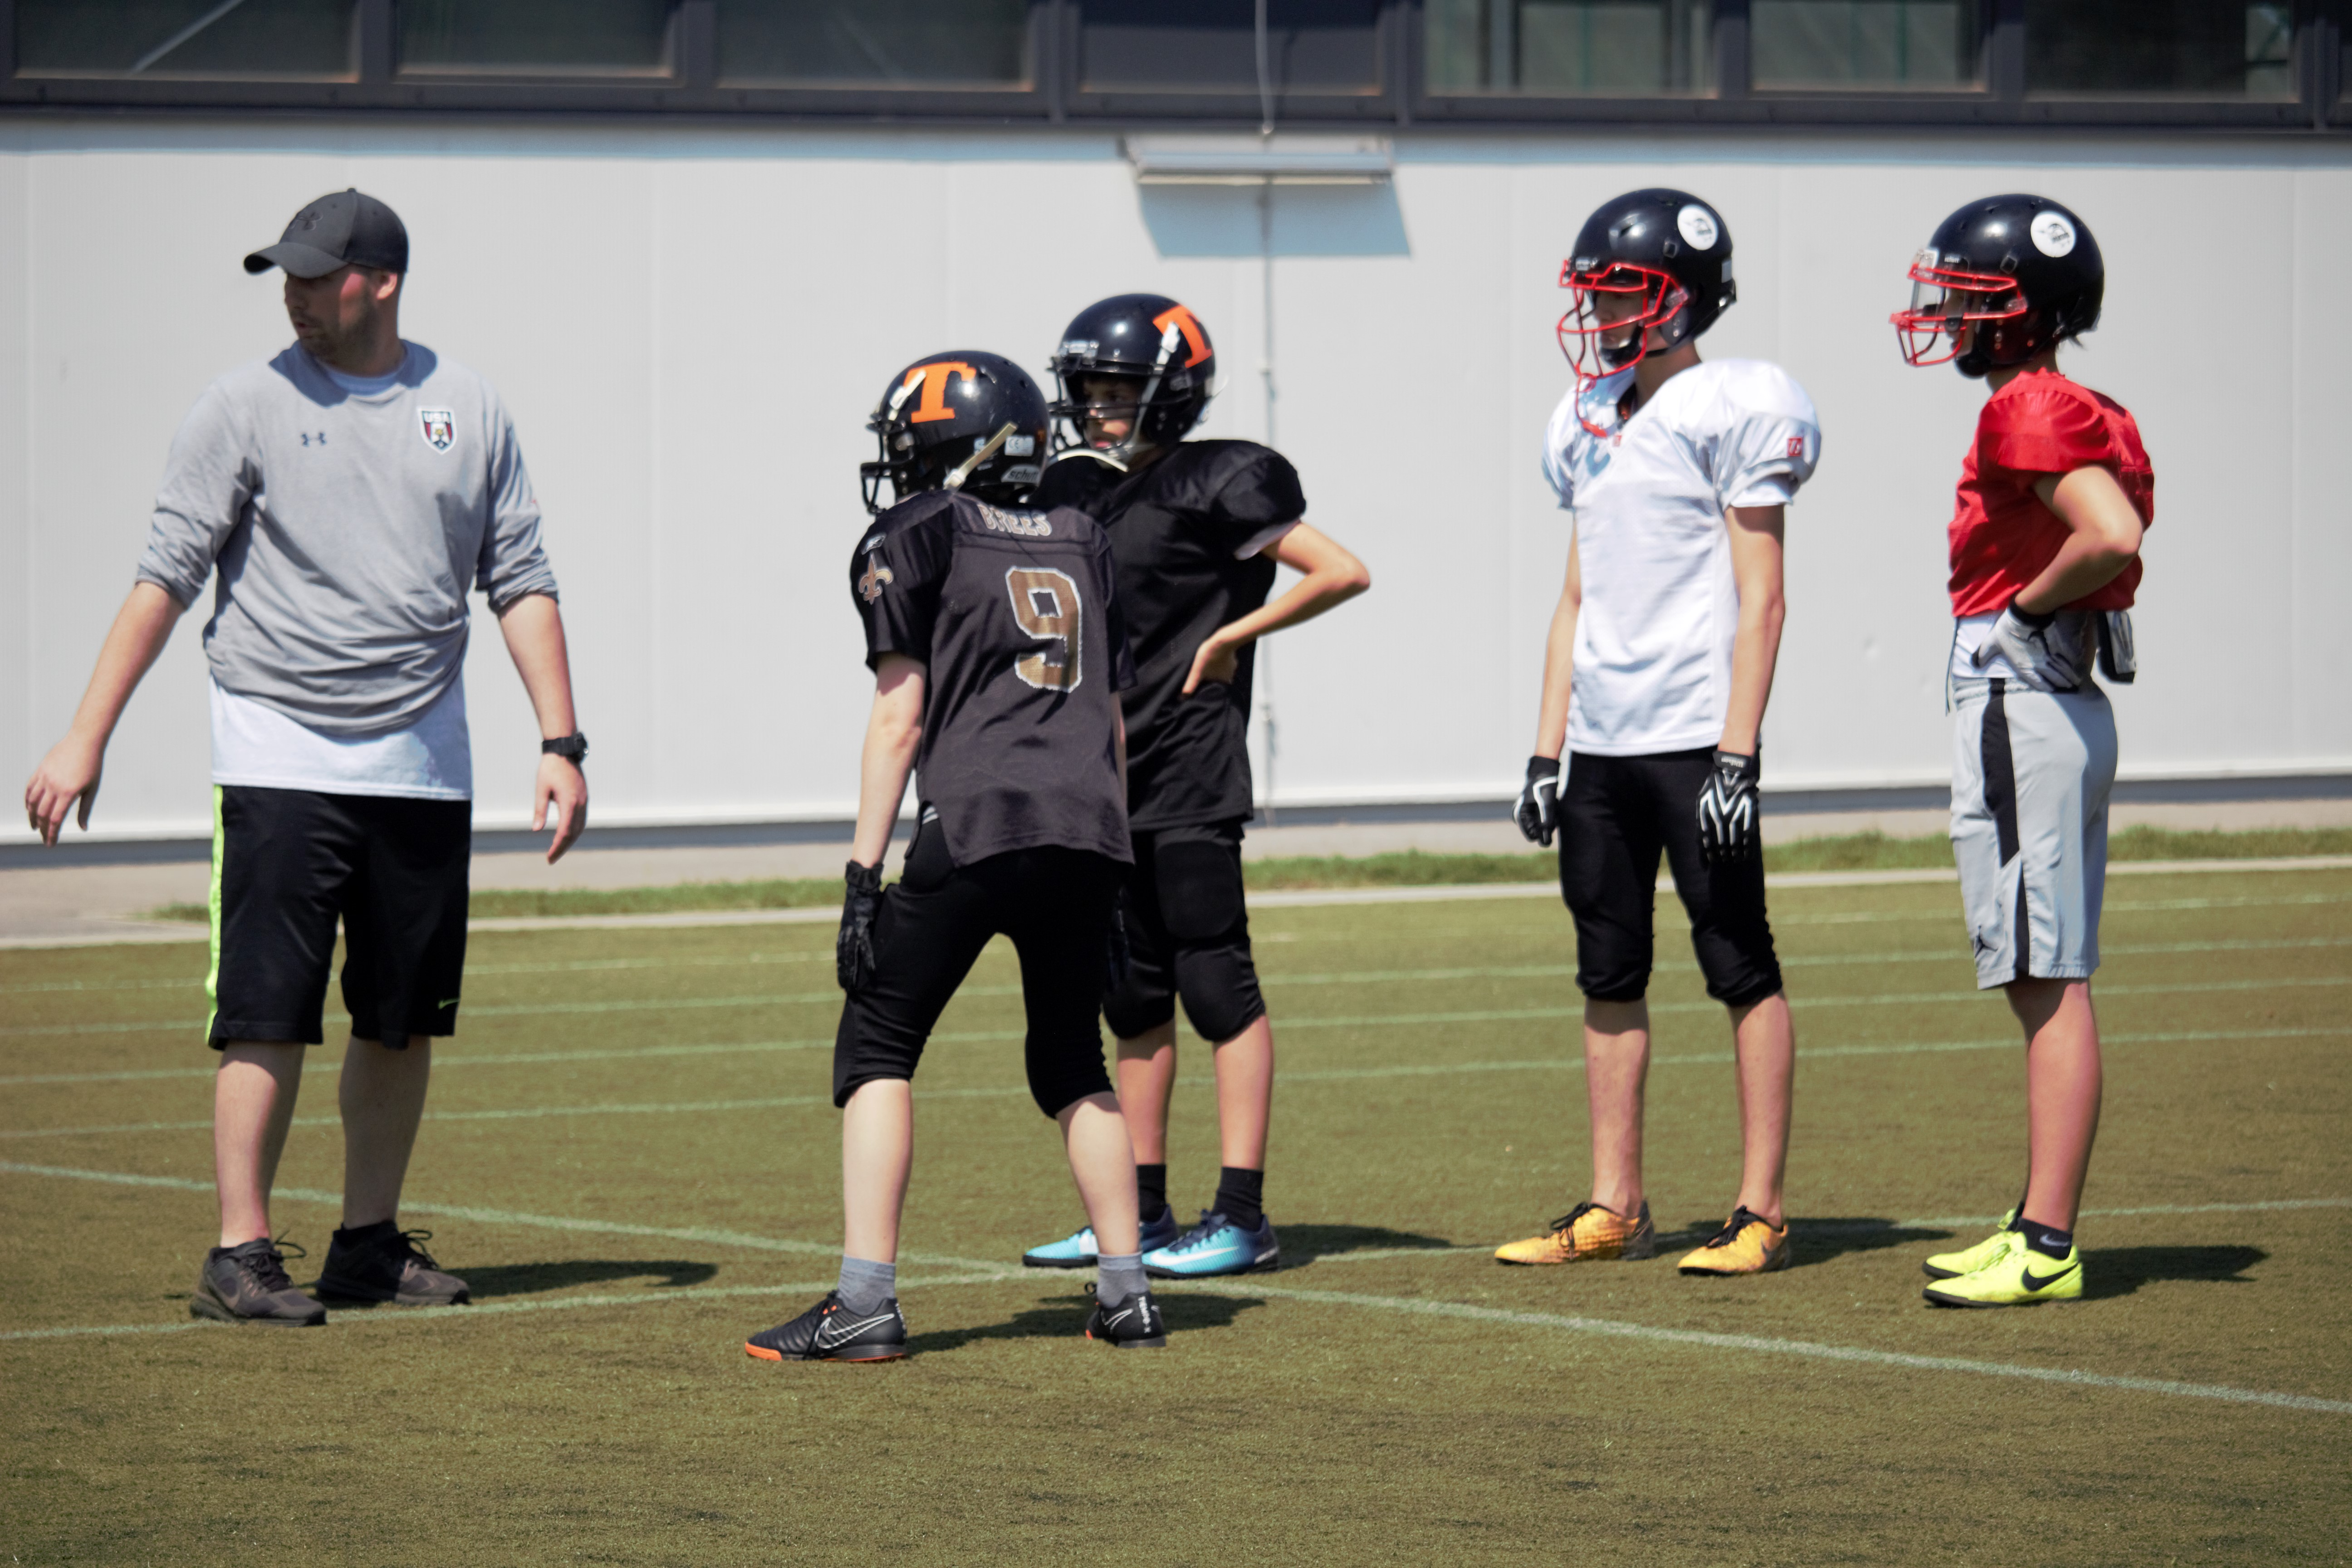 https://localhost/youthfootballonline/burst-and-buzz-tackling-drill/